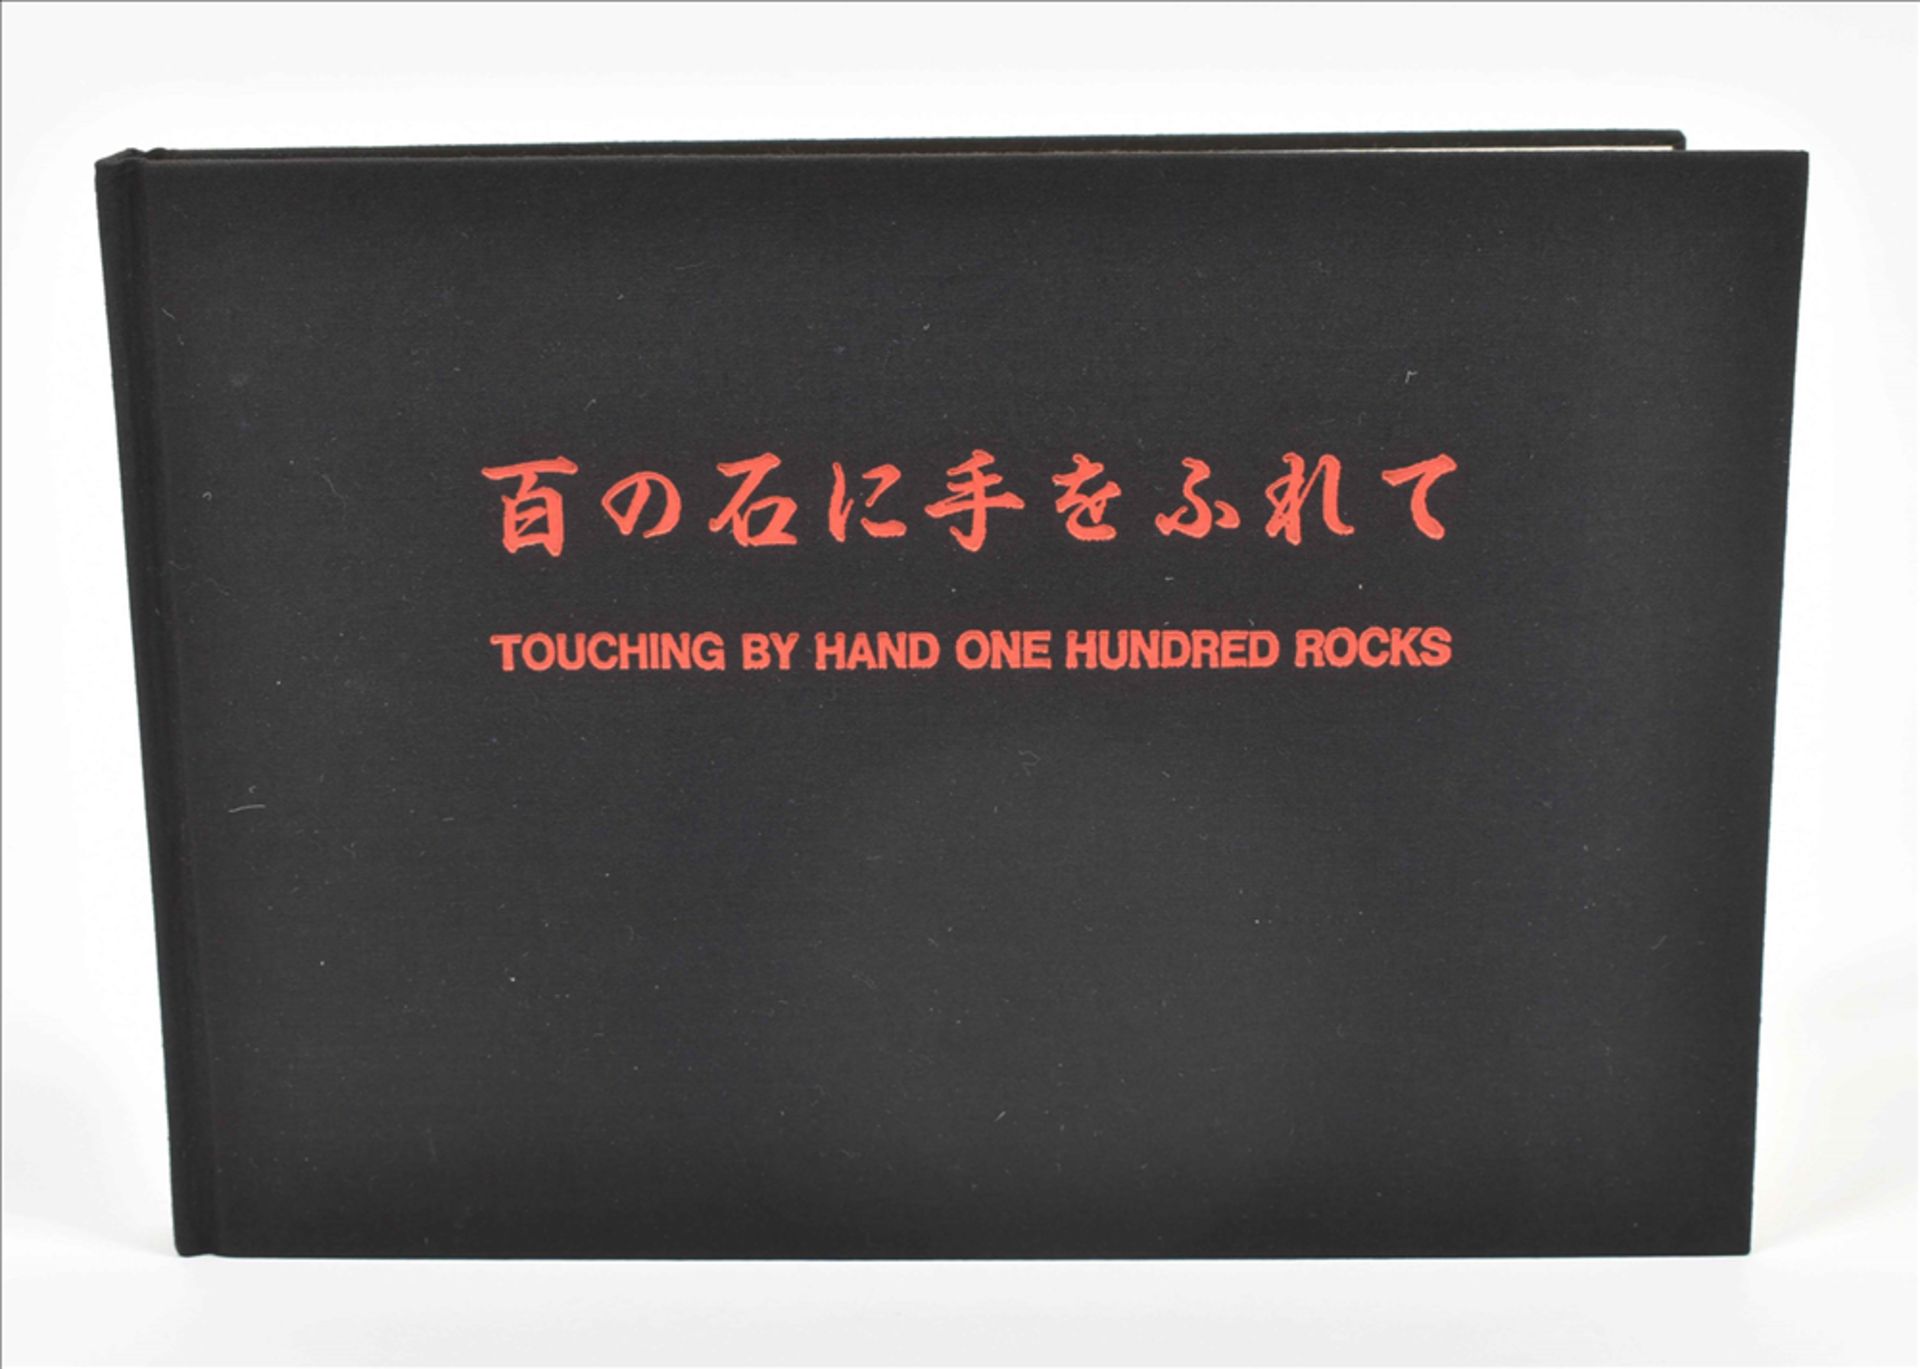 Hamish Fulton, Touching by hand one hundred rocks